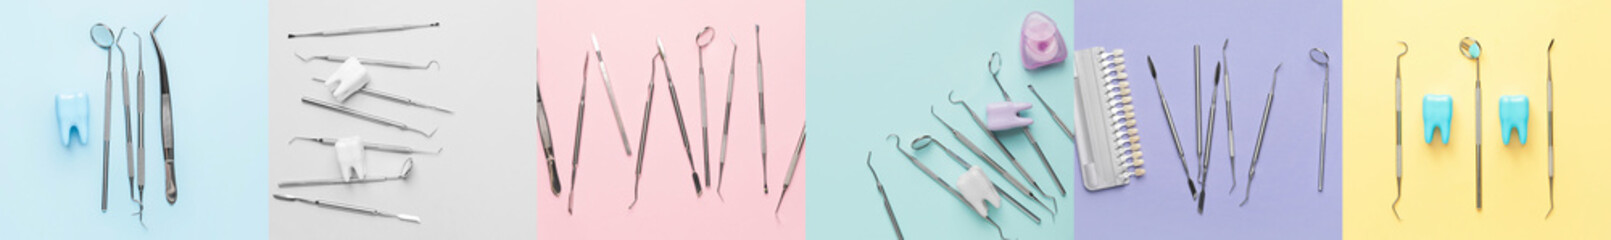 Collage with dental tools on colorful background